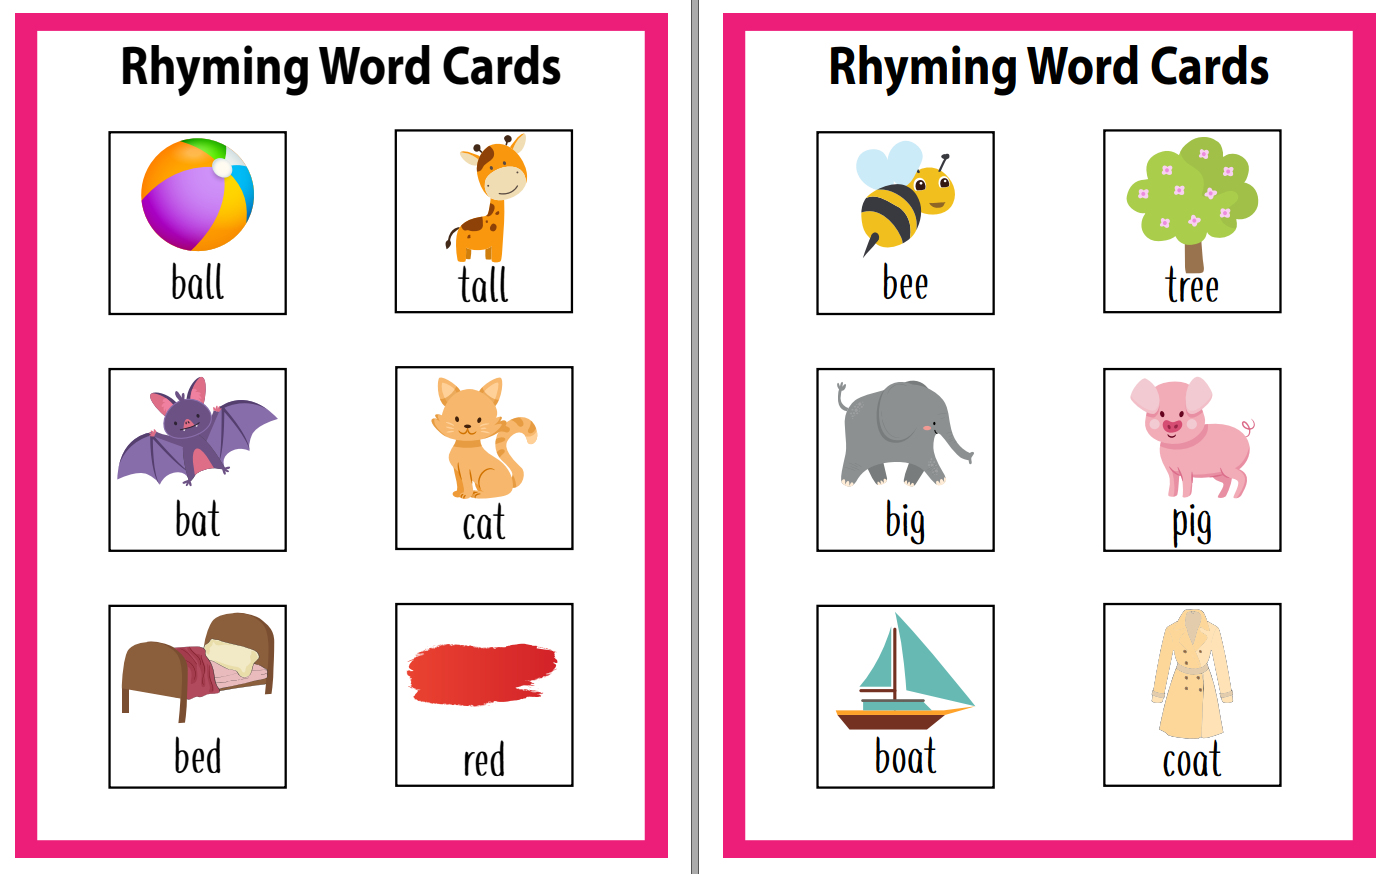 TIẾNG ANH MẦM NON - Rhyming Word Cards